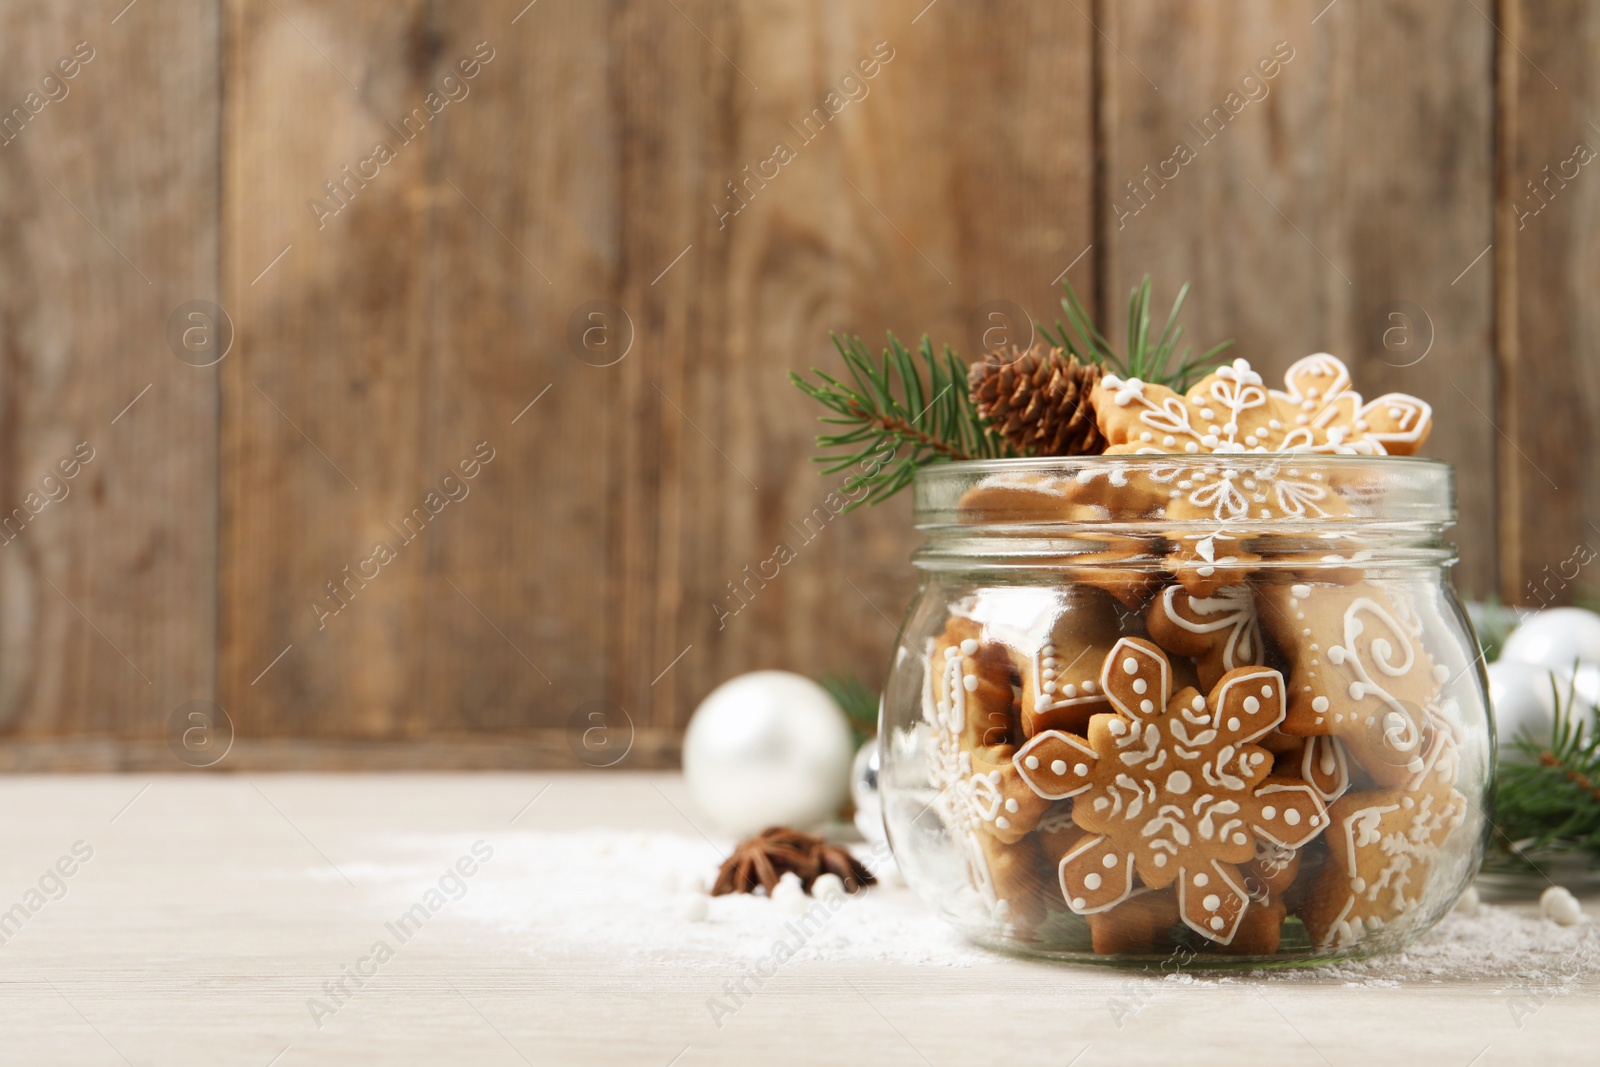 Photo of Tasty Christmas cookies in glass jar and festive decor on beige wooden table. Space for text